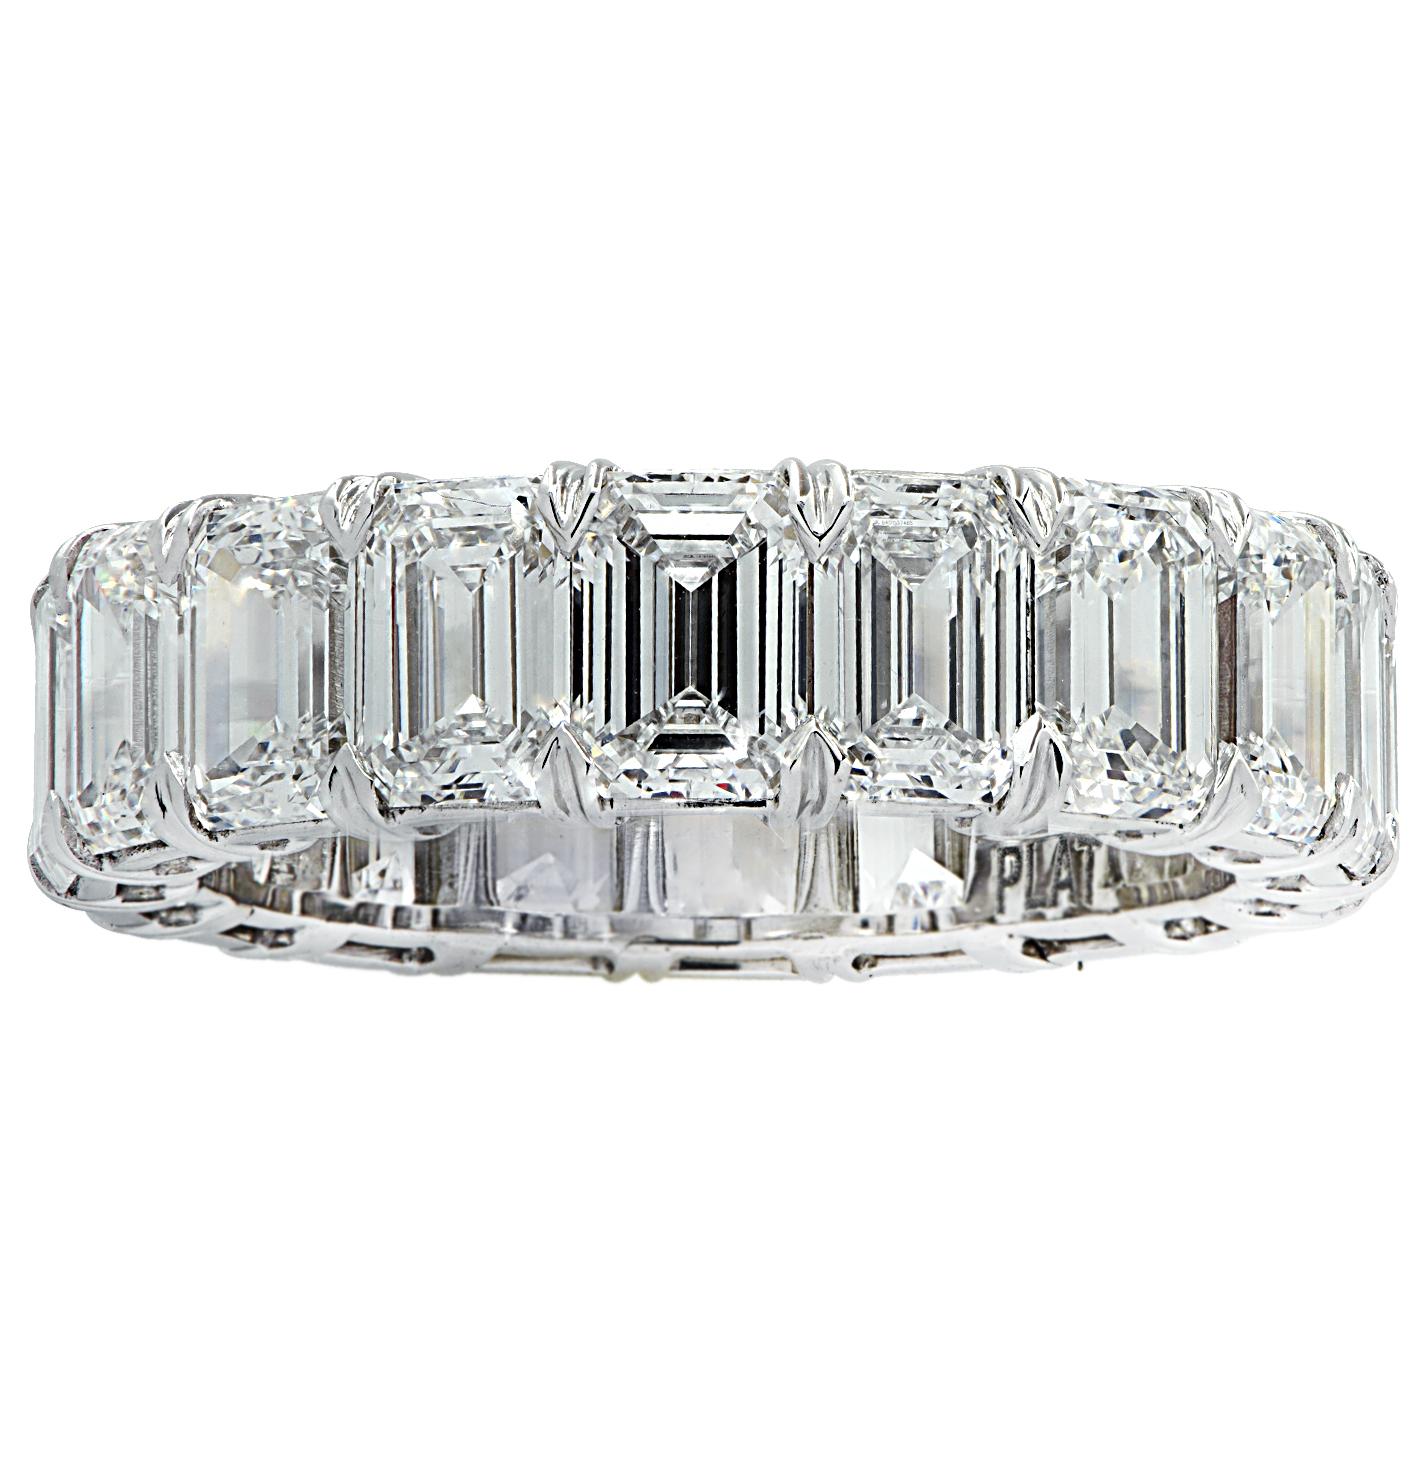 Exquisite Vivid Diamonds eternity band crafted in Platinum, showcasing 18 stunning GIA Certified emerald cut diamonds weighing 7.88 carats total, D-F color, VVS-VS clarity. Each diamond was carefully selected, perfectly matched and set in a seamless